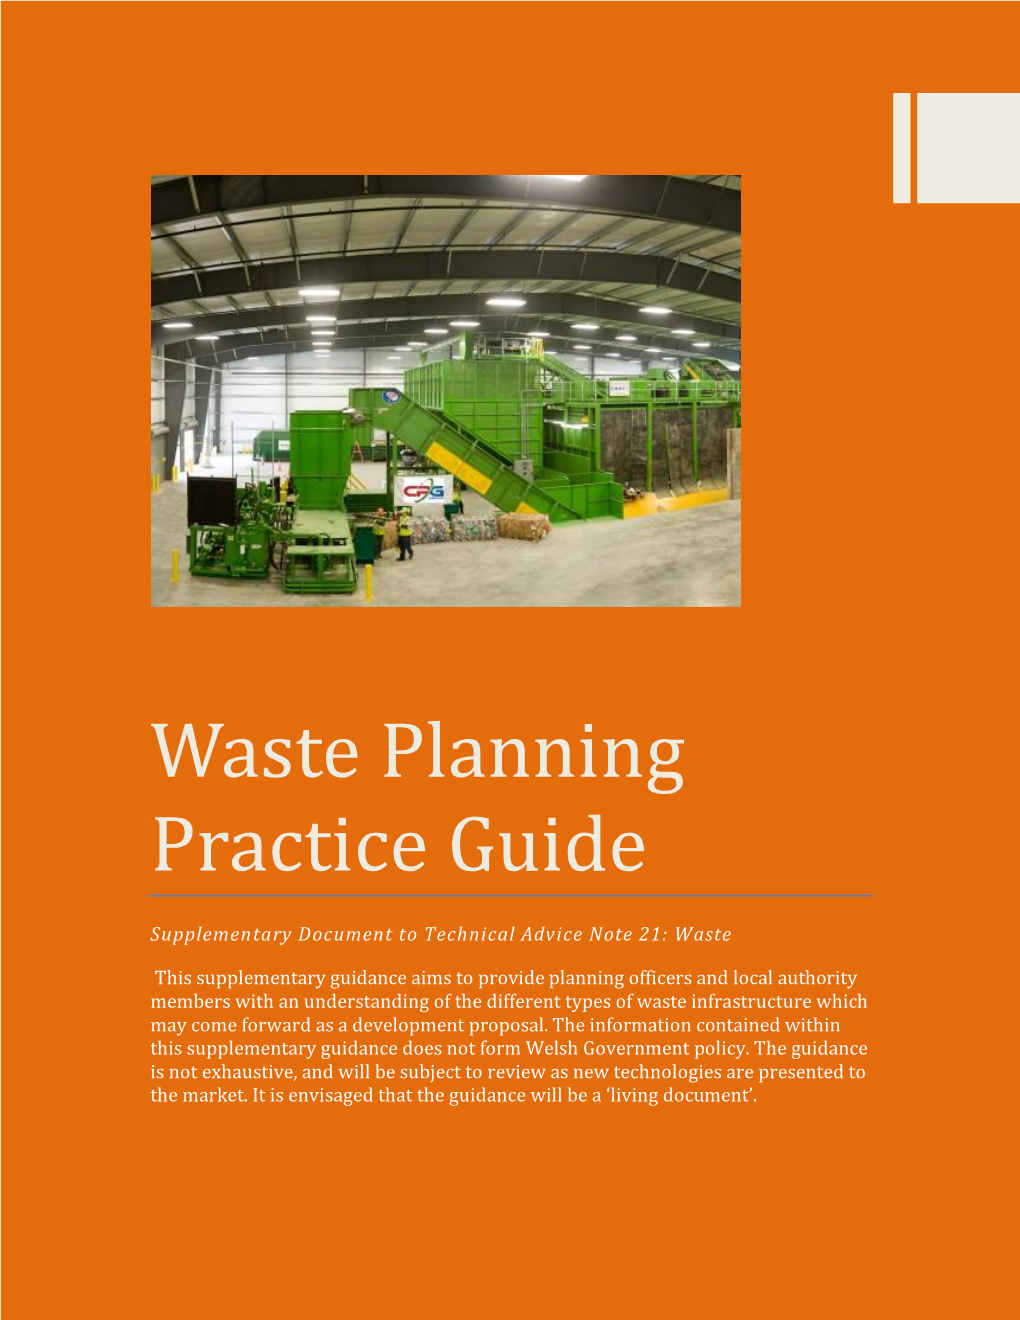 Waste Planning Practice Guide